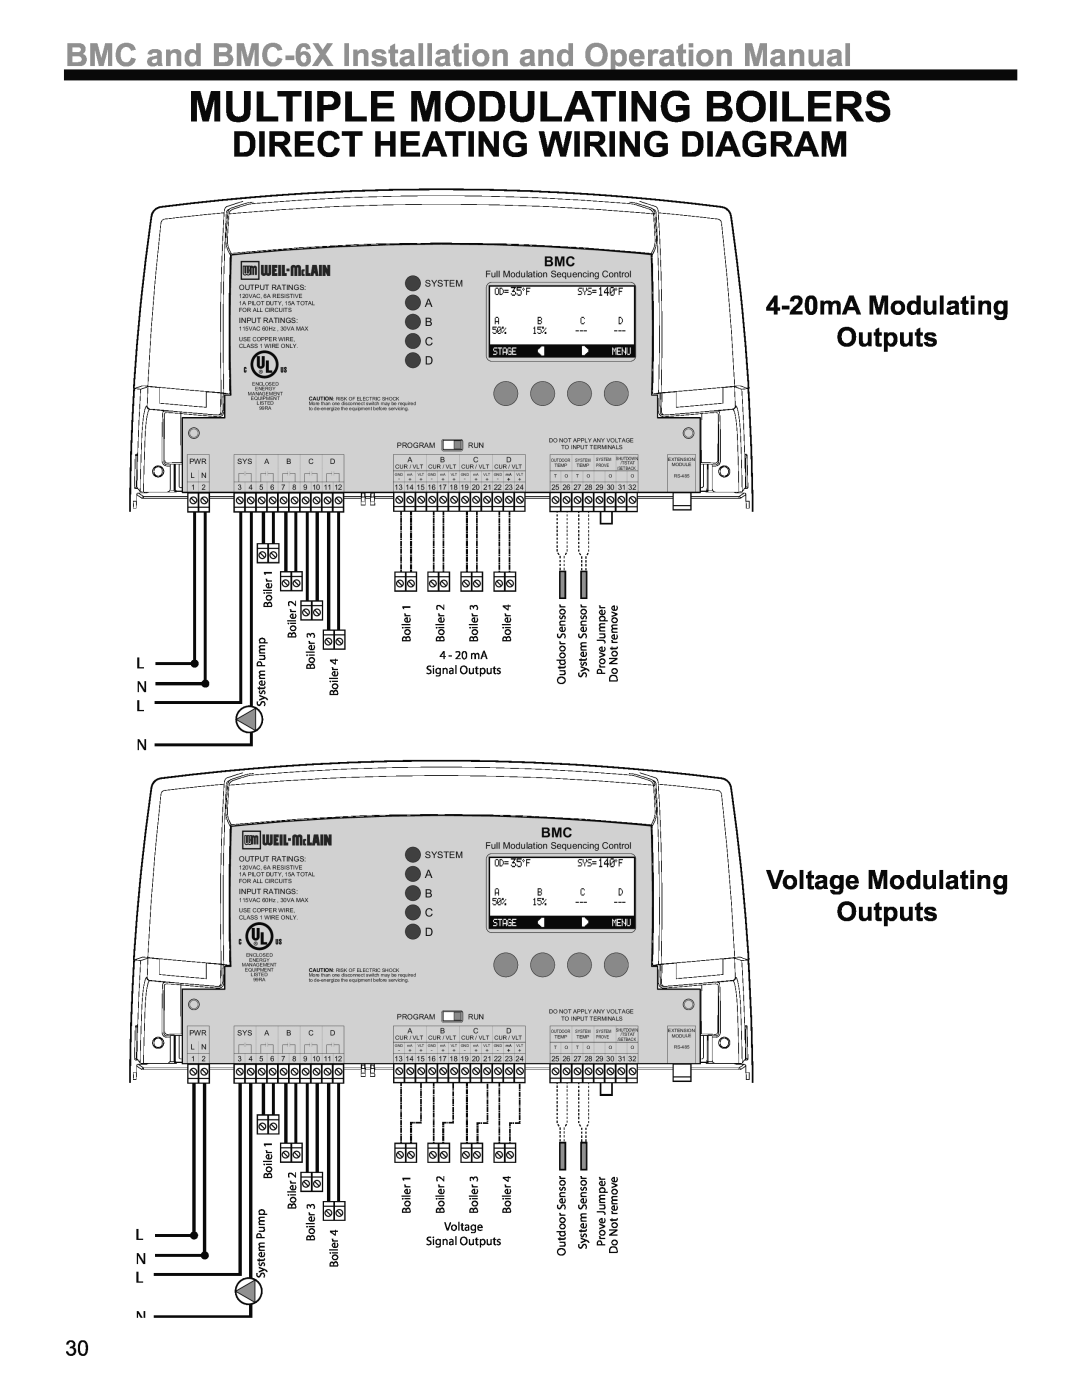 Weil-McLain BMC-6X operation manual Direct Heating Wiring Diagram, 4-20mAModulating Outputs, Voltage Modulating Outputs 